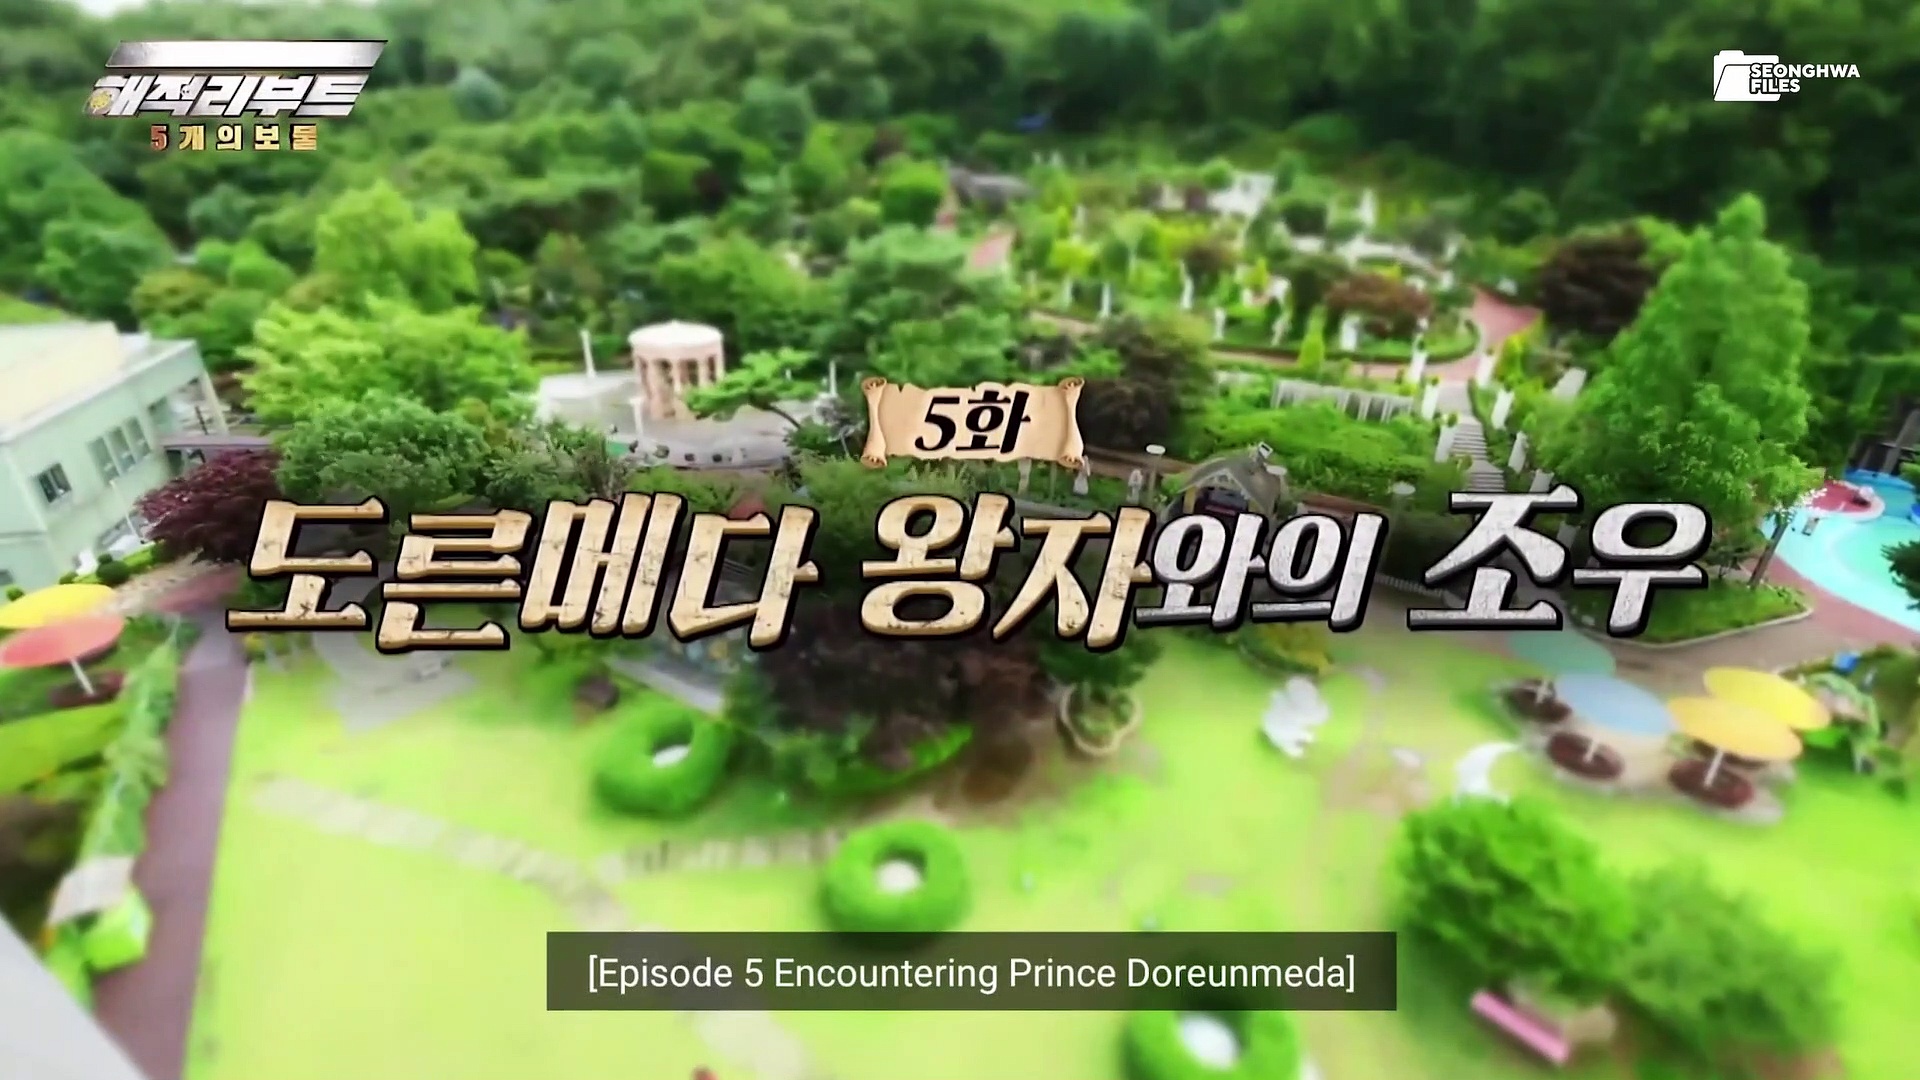 Pirate Reboot The 5 Treasures EP.5 (ENG Sub) - Watch Dailymotion Videos